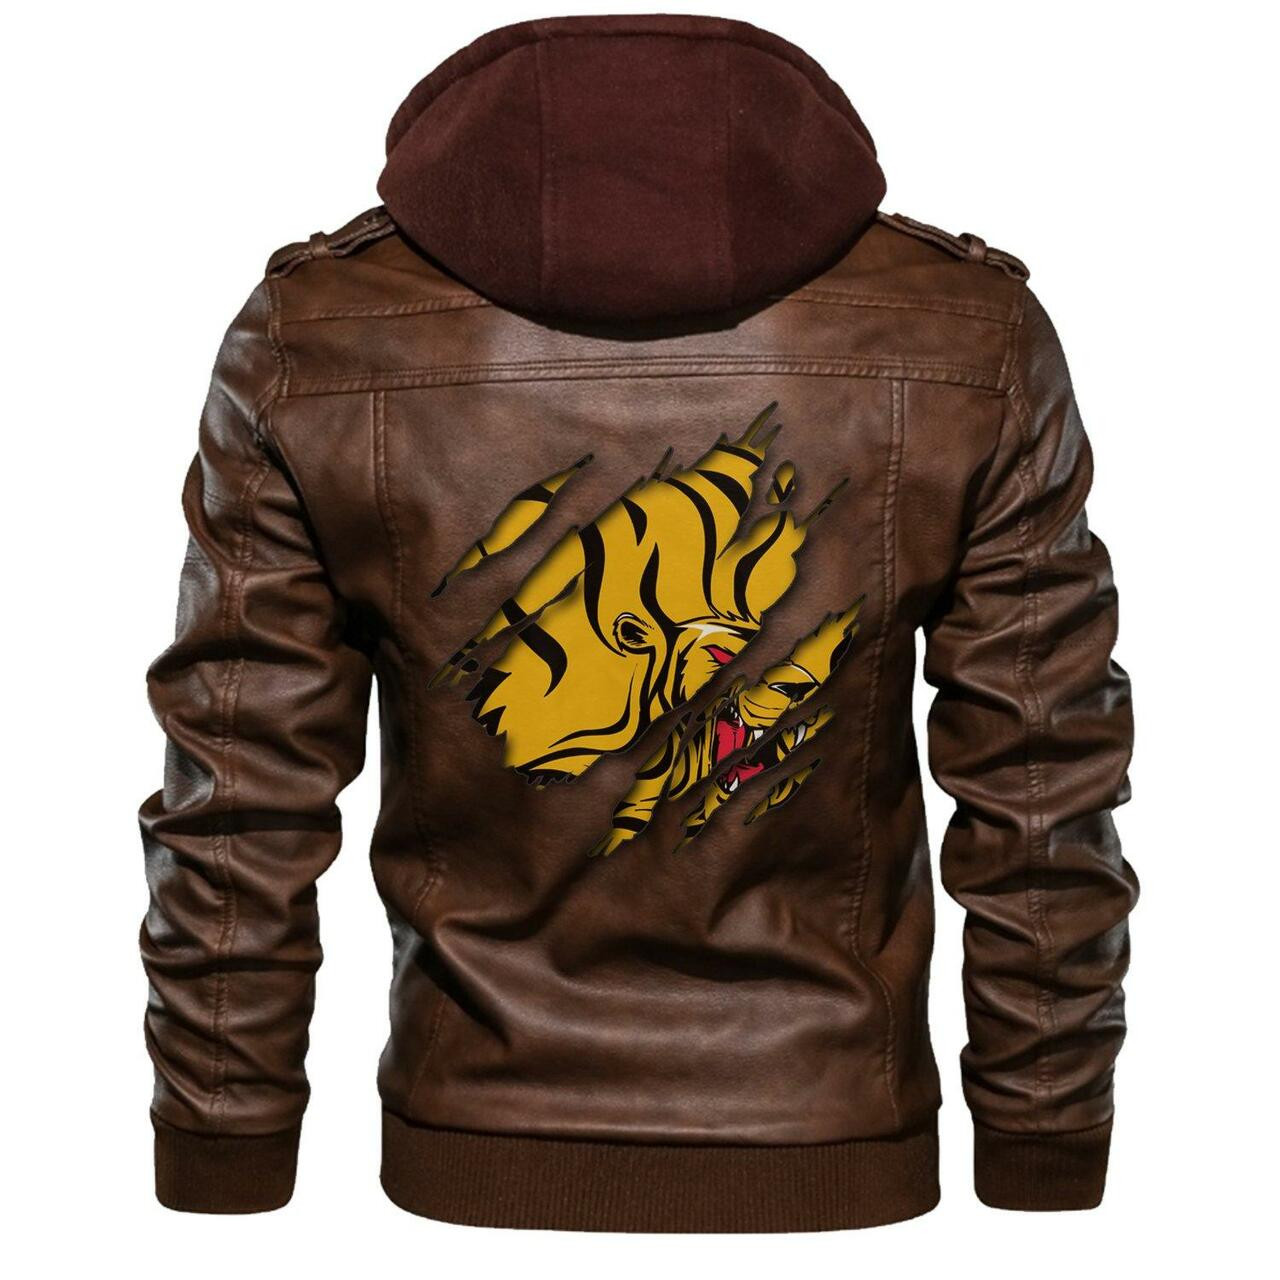 Don't wait another minute, Get Hot Leather Jacket today 83